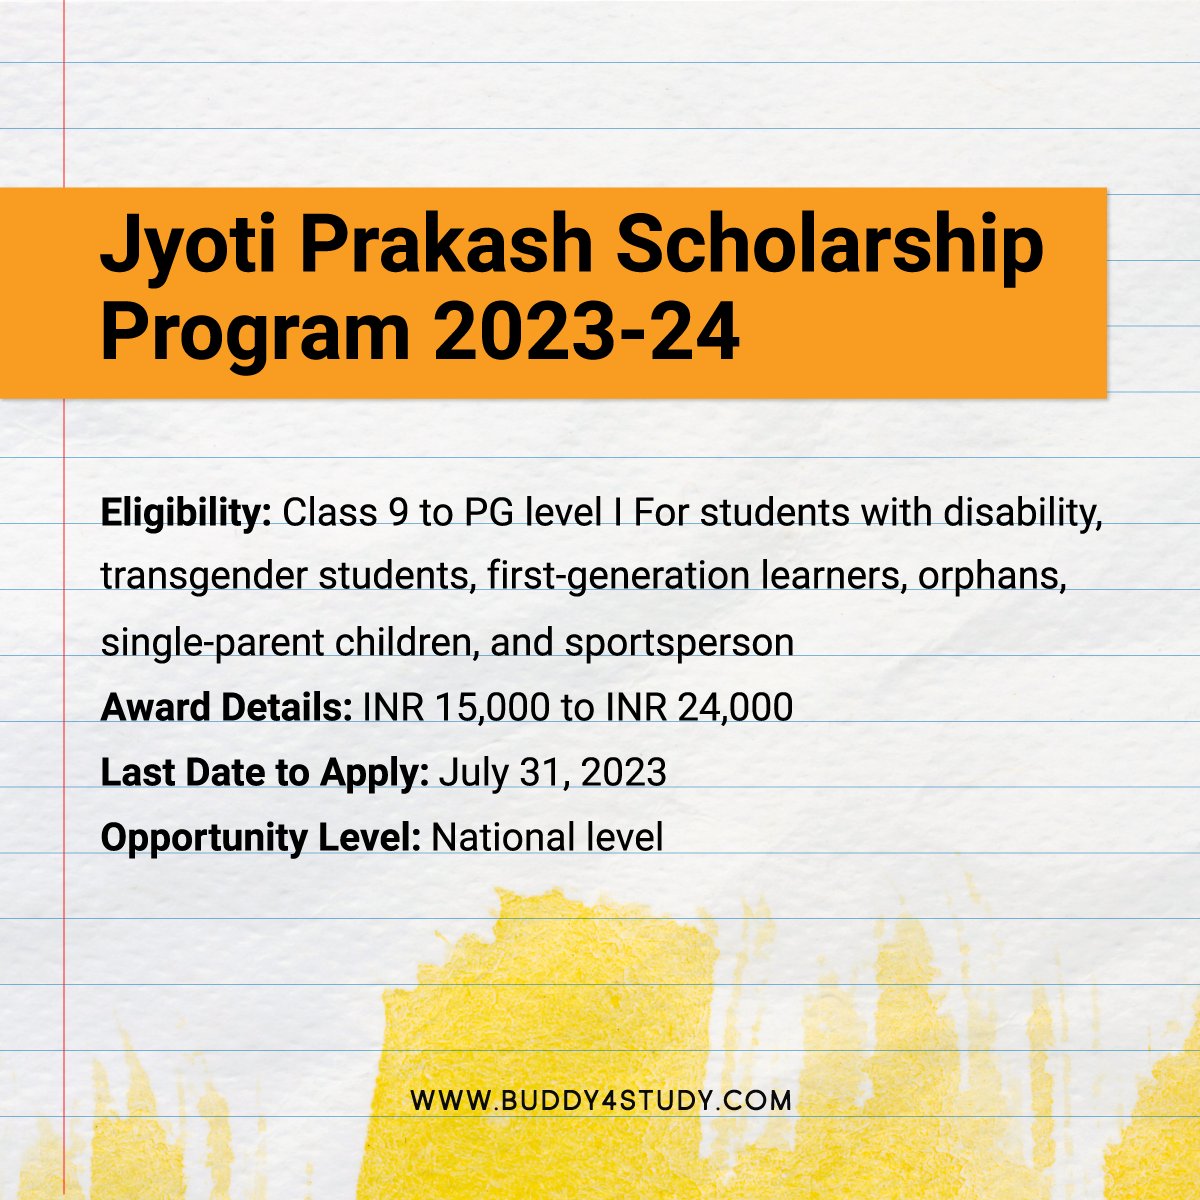 New Scholarships Alert!
Don't miss out on these five amazing #scholarships this #July 2023.
#Scholarships #EducationFunding #ScholarshipsforIndianStudents #ScholarshipsIndia #ScholarshipOpportunities #ScholarshipsInJuly2023 #Buddy4Study